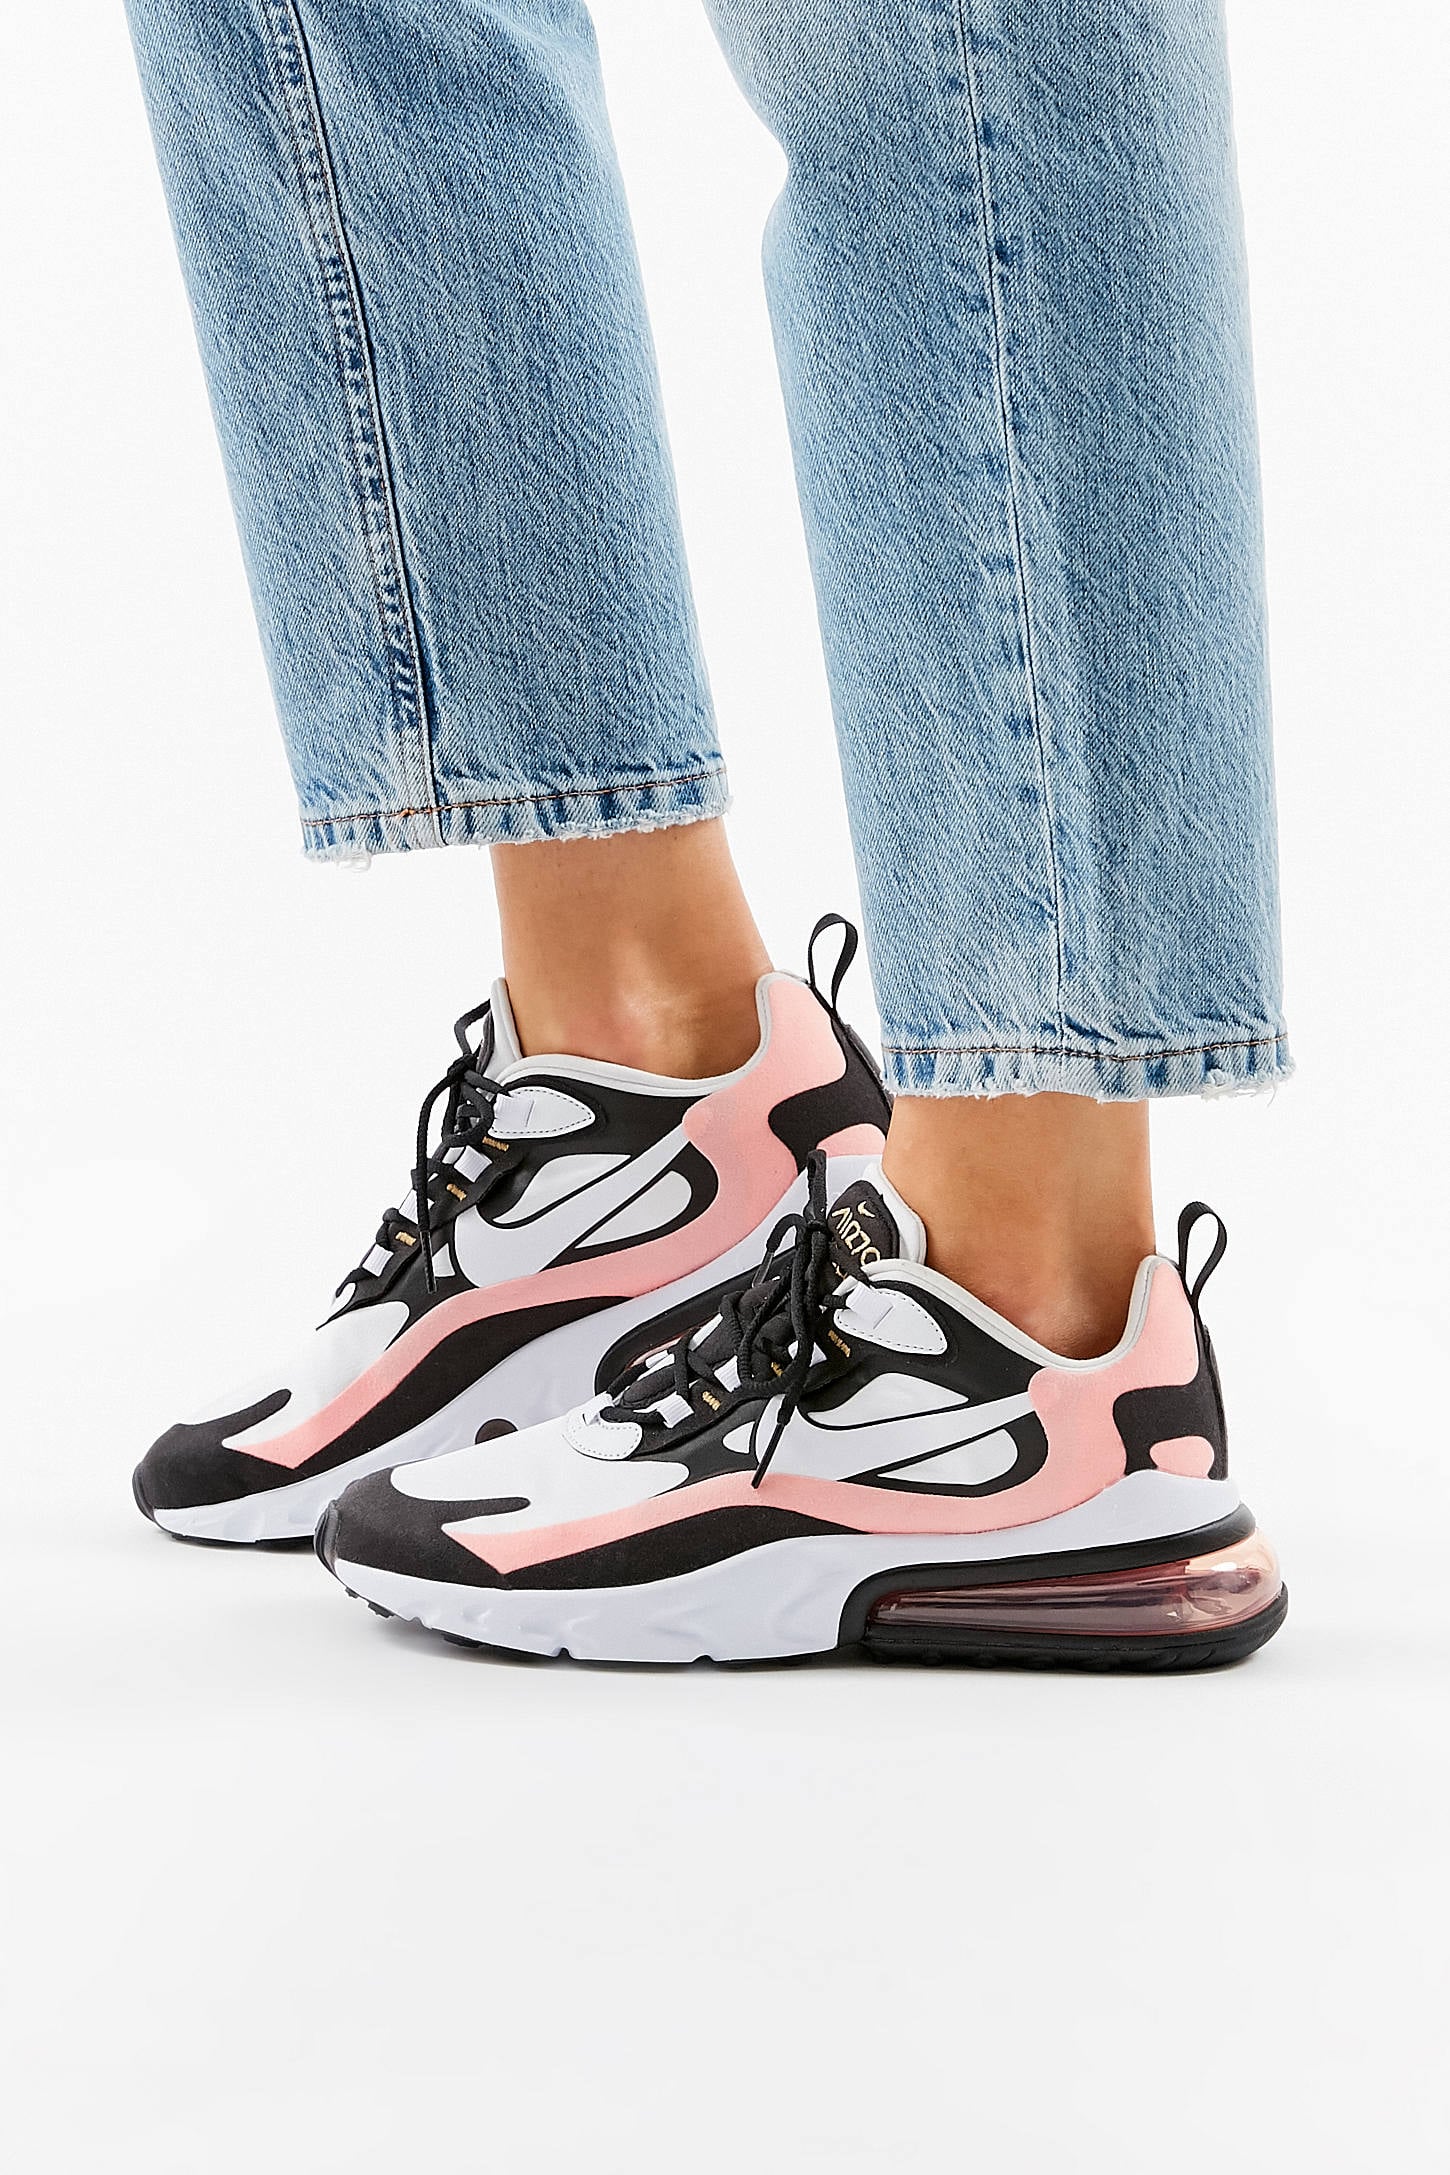 nike air max 270 womens outfit